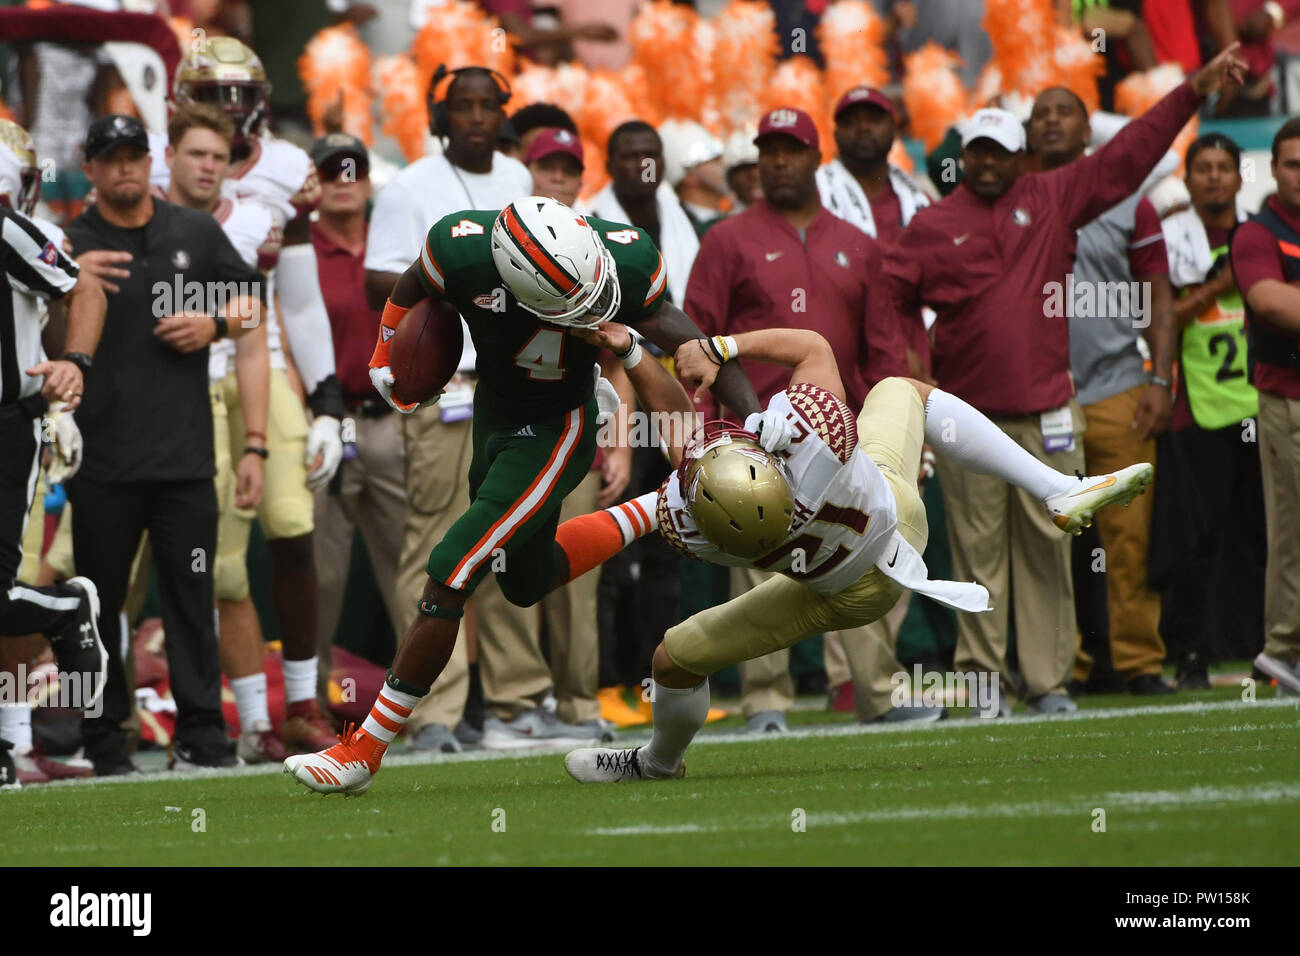 Miami Gardens, Florida, USA. 6th Oct, 2018. Jeff Thomas #4 of Miami is tackled by Logan Tyler #21 of Florida State during the NCAA football game between the Miami Hurricanes and the Florida State Seminoles in Miami Gardens, Florida. The Hurricanes defeated the Seminoles 28-27. Credit: csm/Alamy Live News Stock Photo